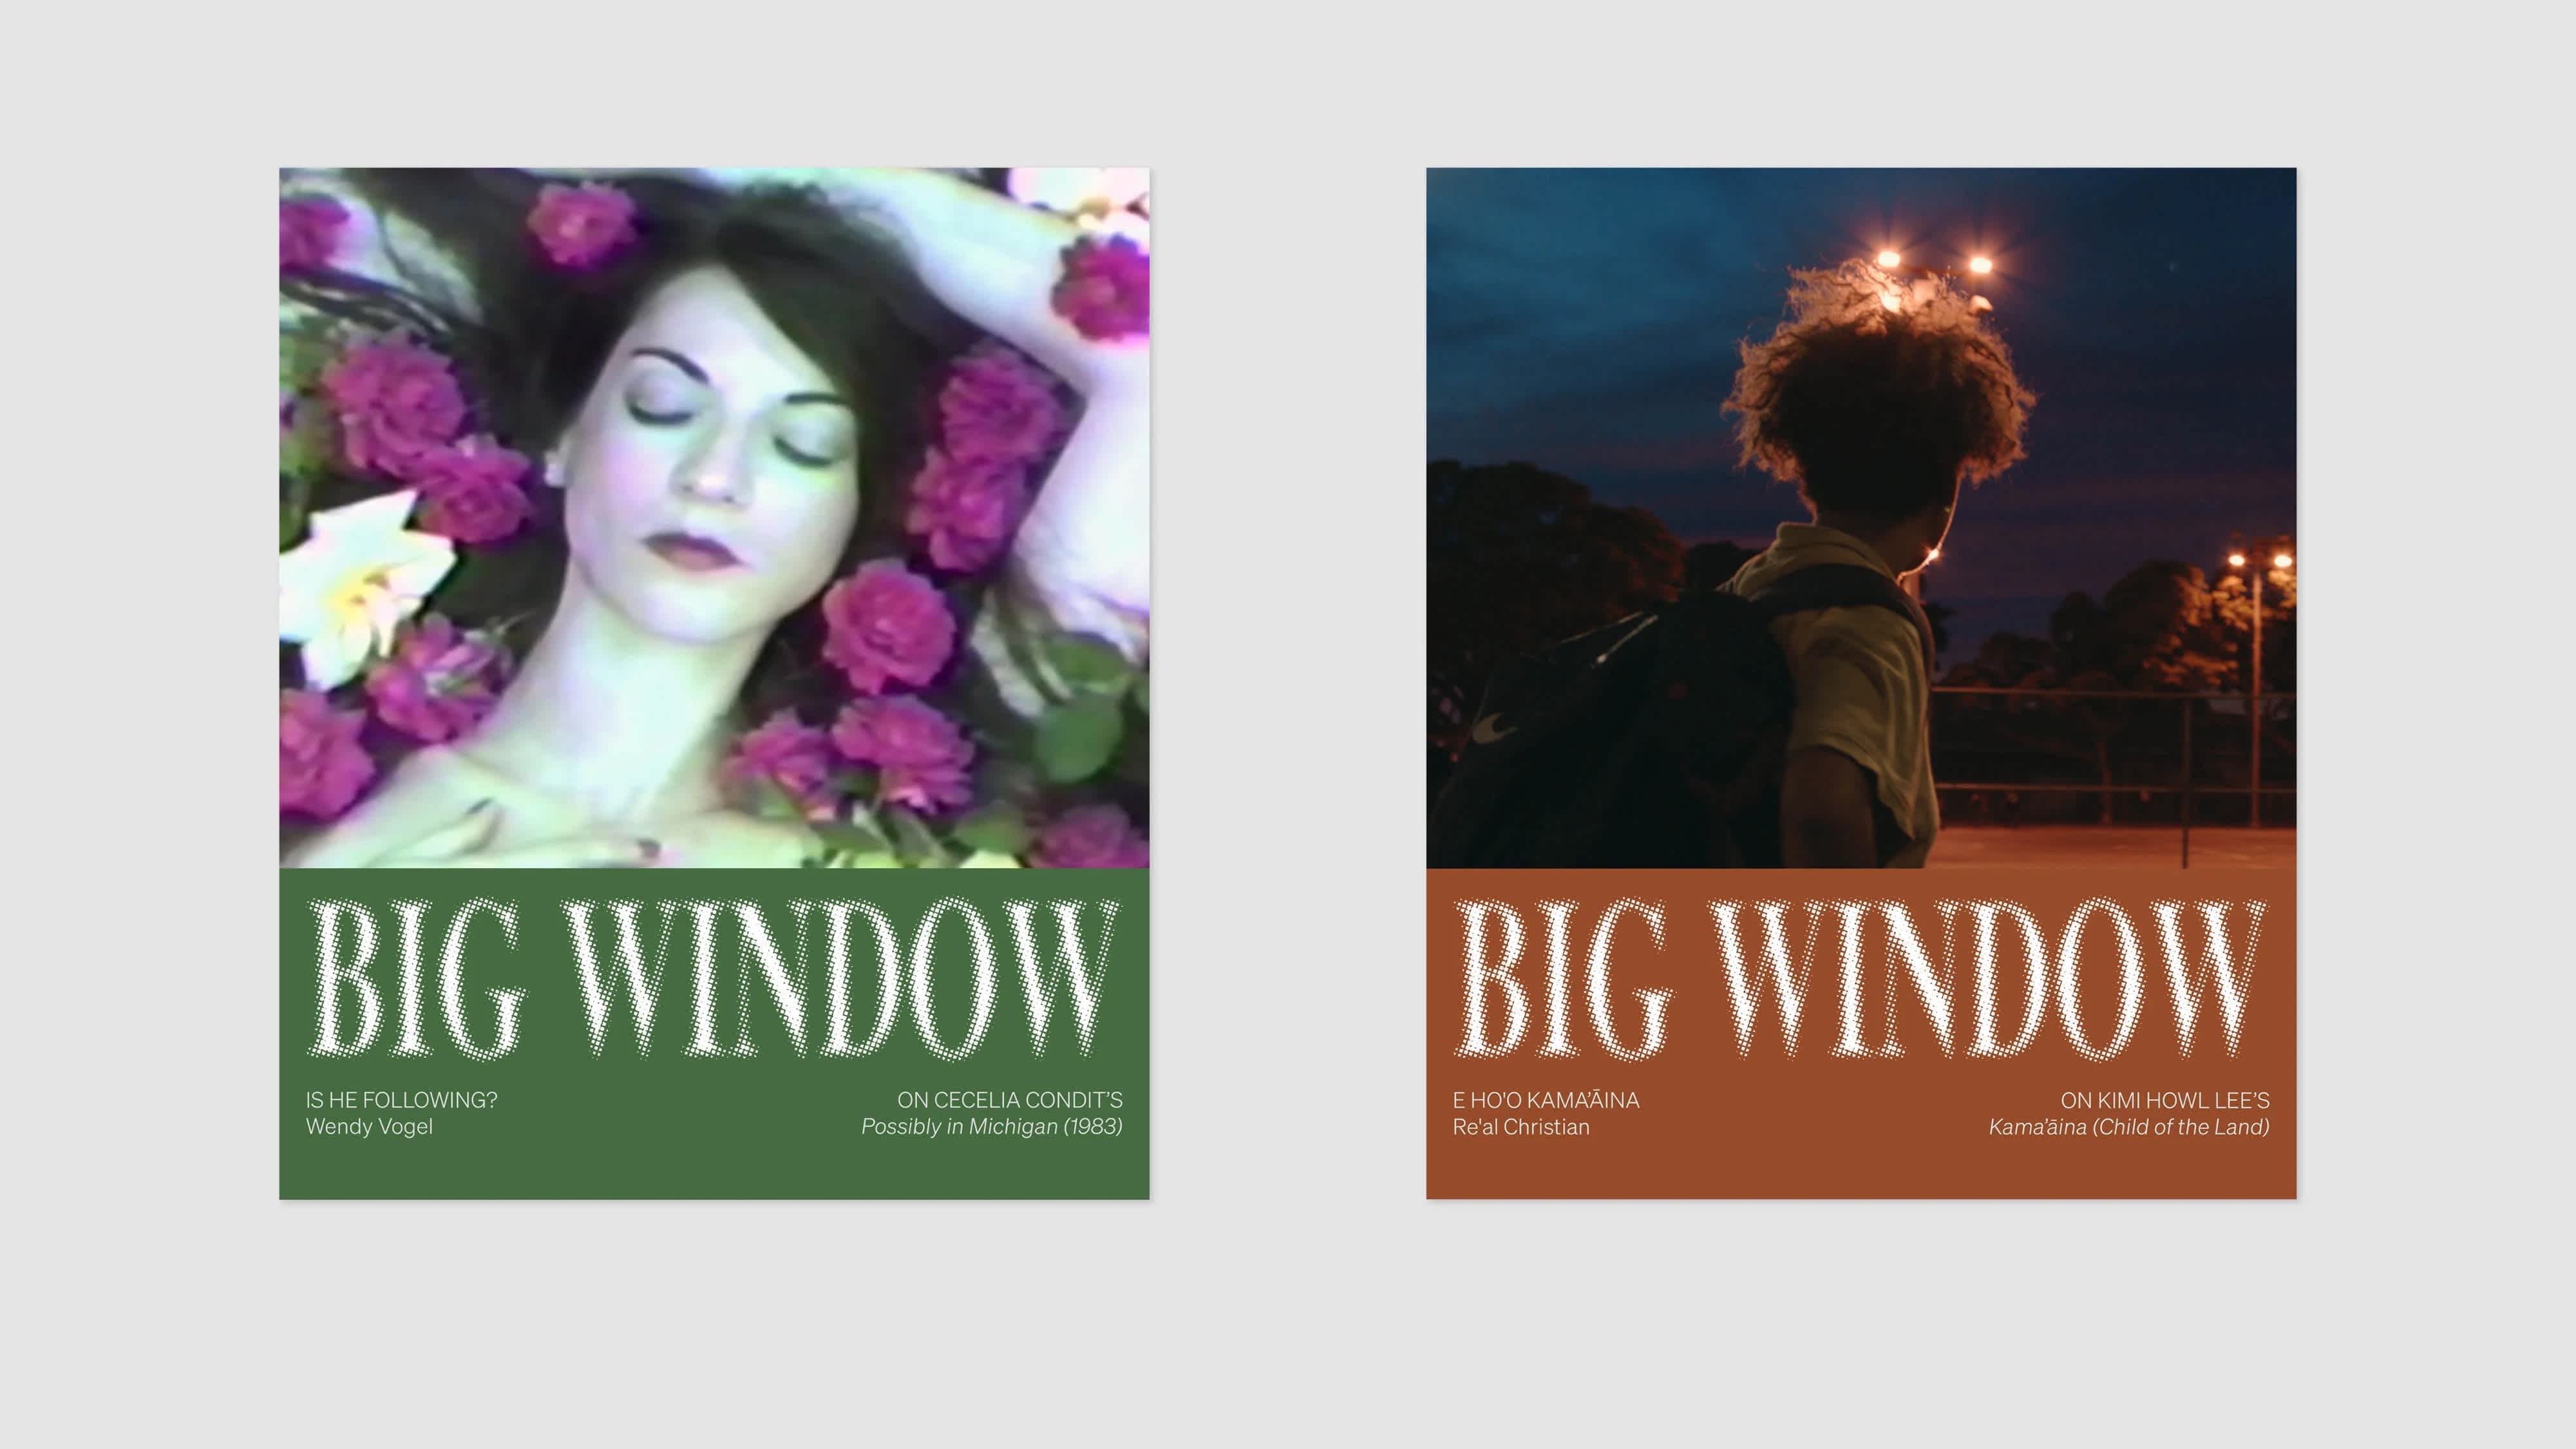 Two colorful square images on a light gray background. The left image is green and pink, a woman's face and arm are surrounded by flowers. The right image is orange and blue, a young boy's head is turned away from the camera and toward an open, lit field. Both images have the text "Big Window" at the bottom. 